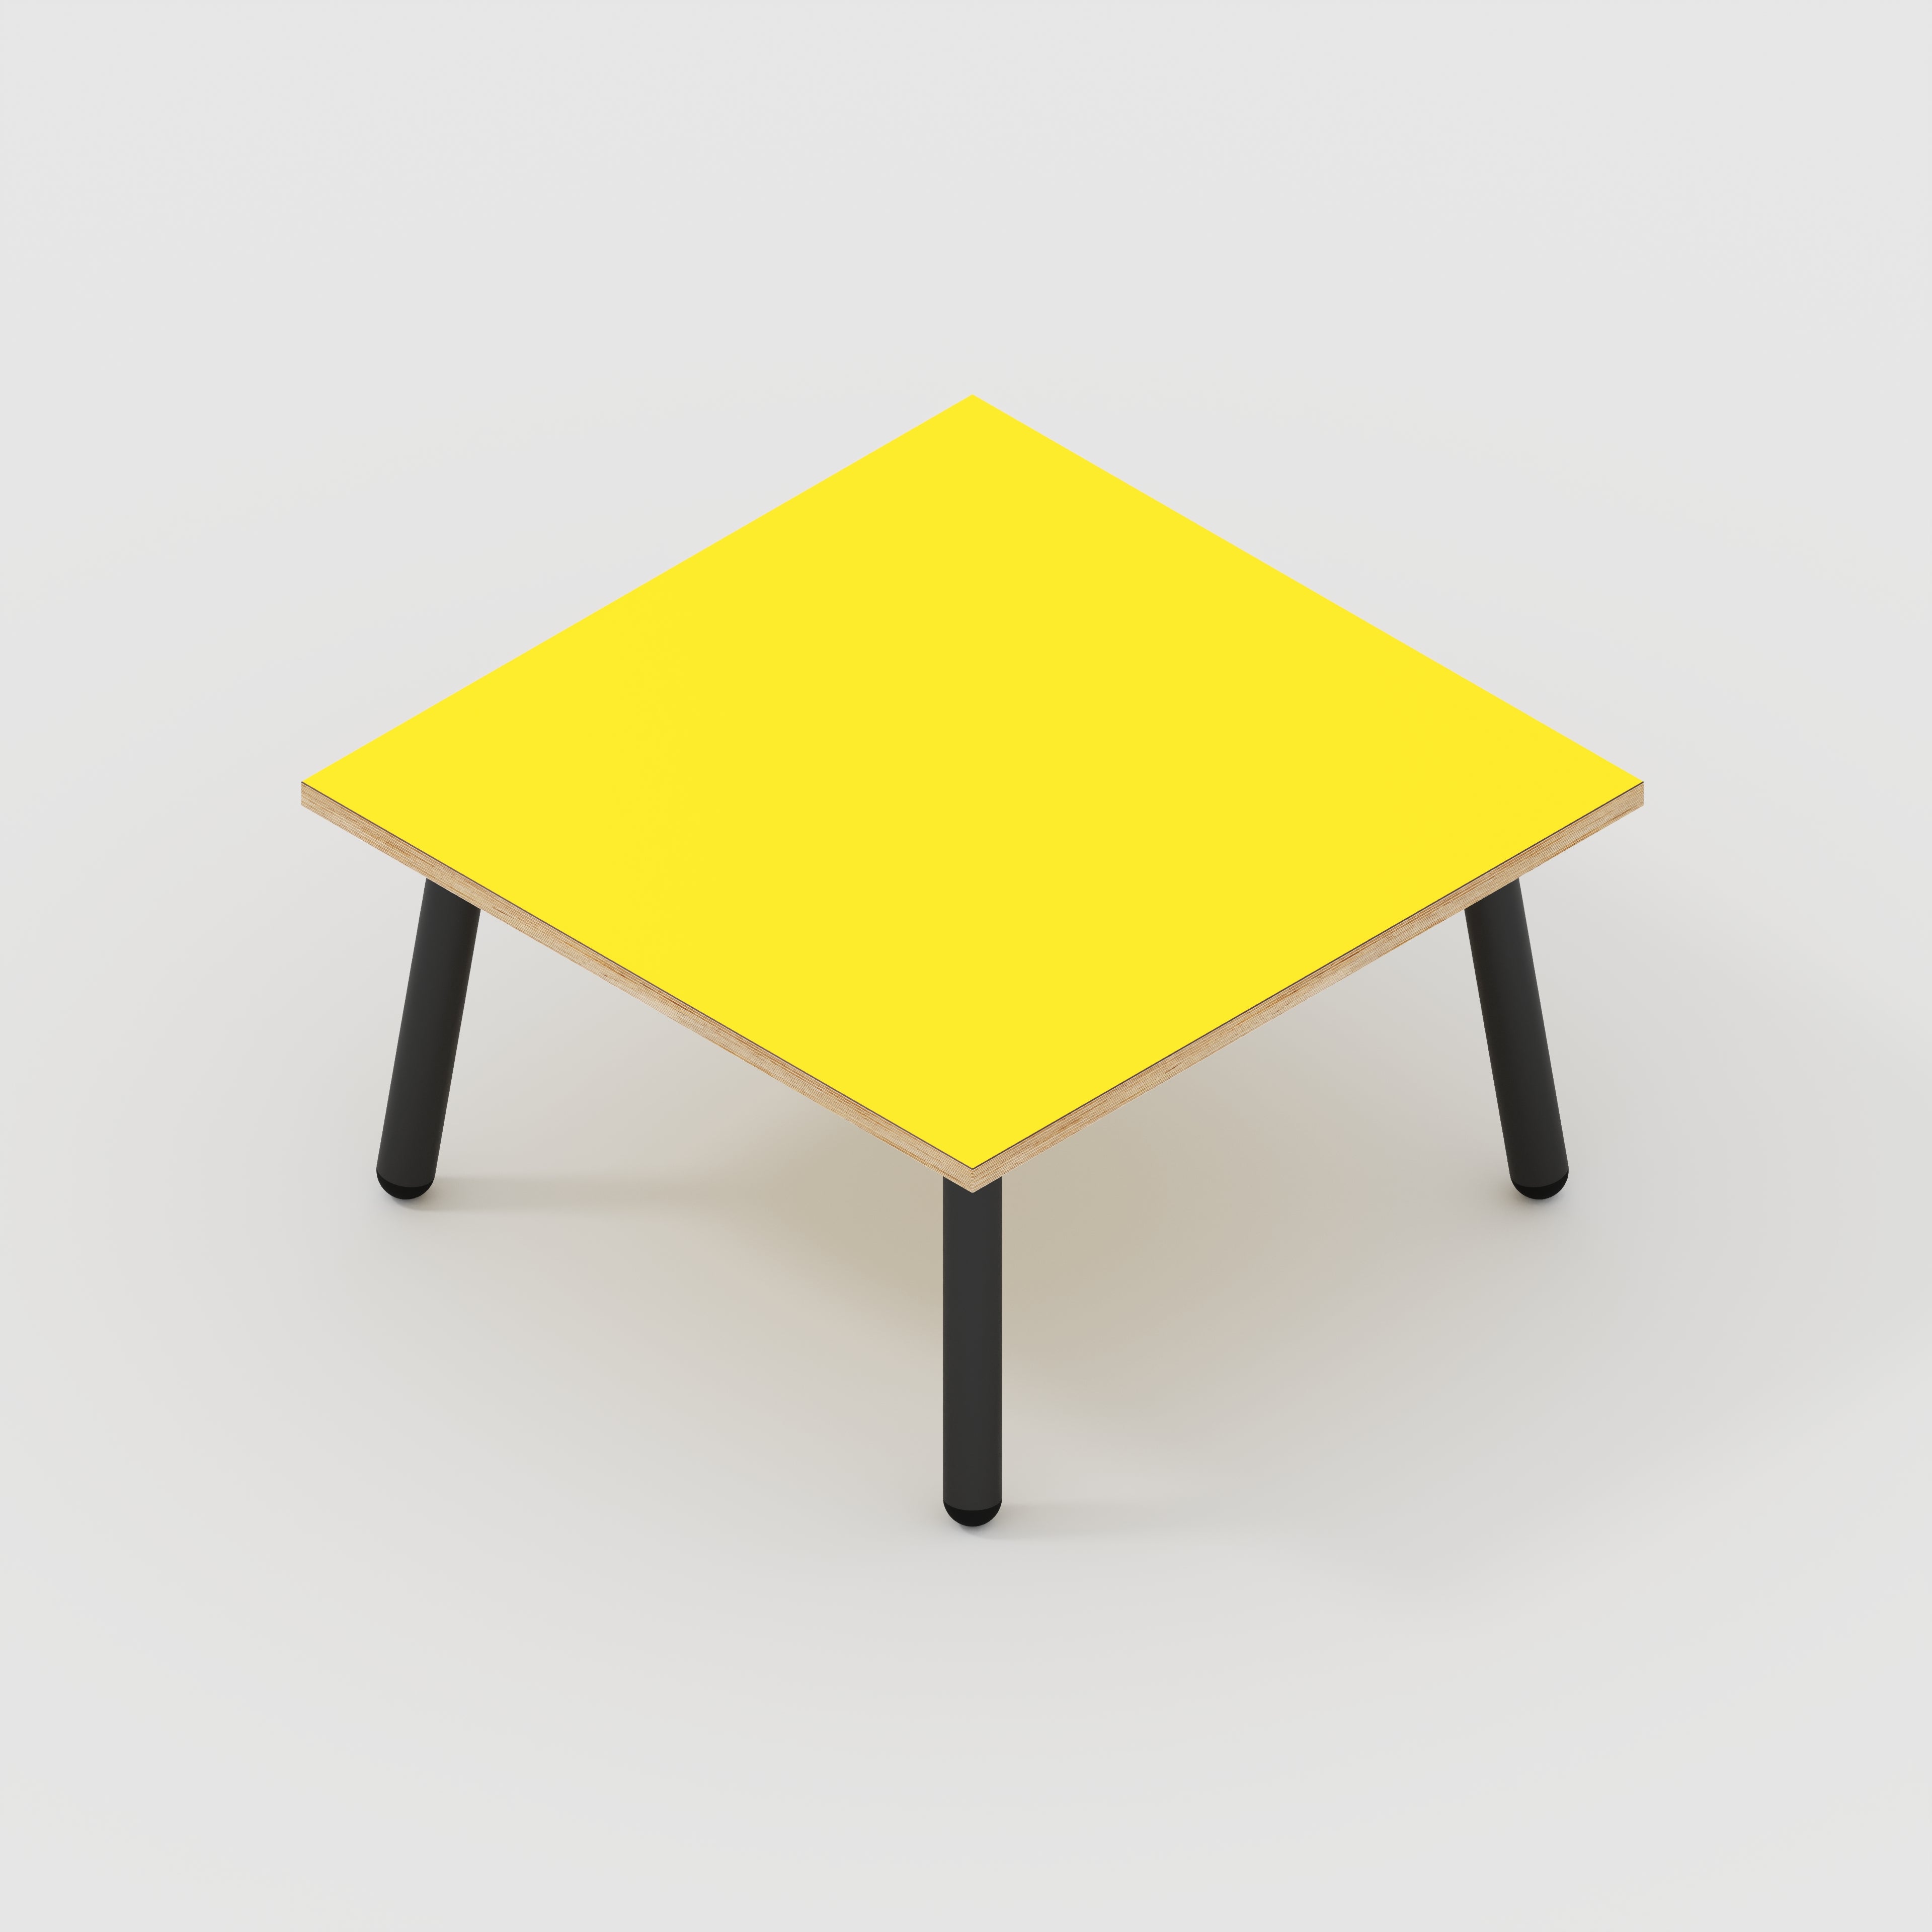 Coffee Table with Black Round Single Pin Legs - Formica Chrome Yellow - 800(w) x 800(d) x 425(h)